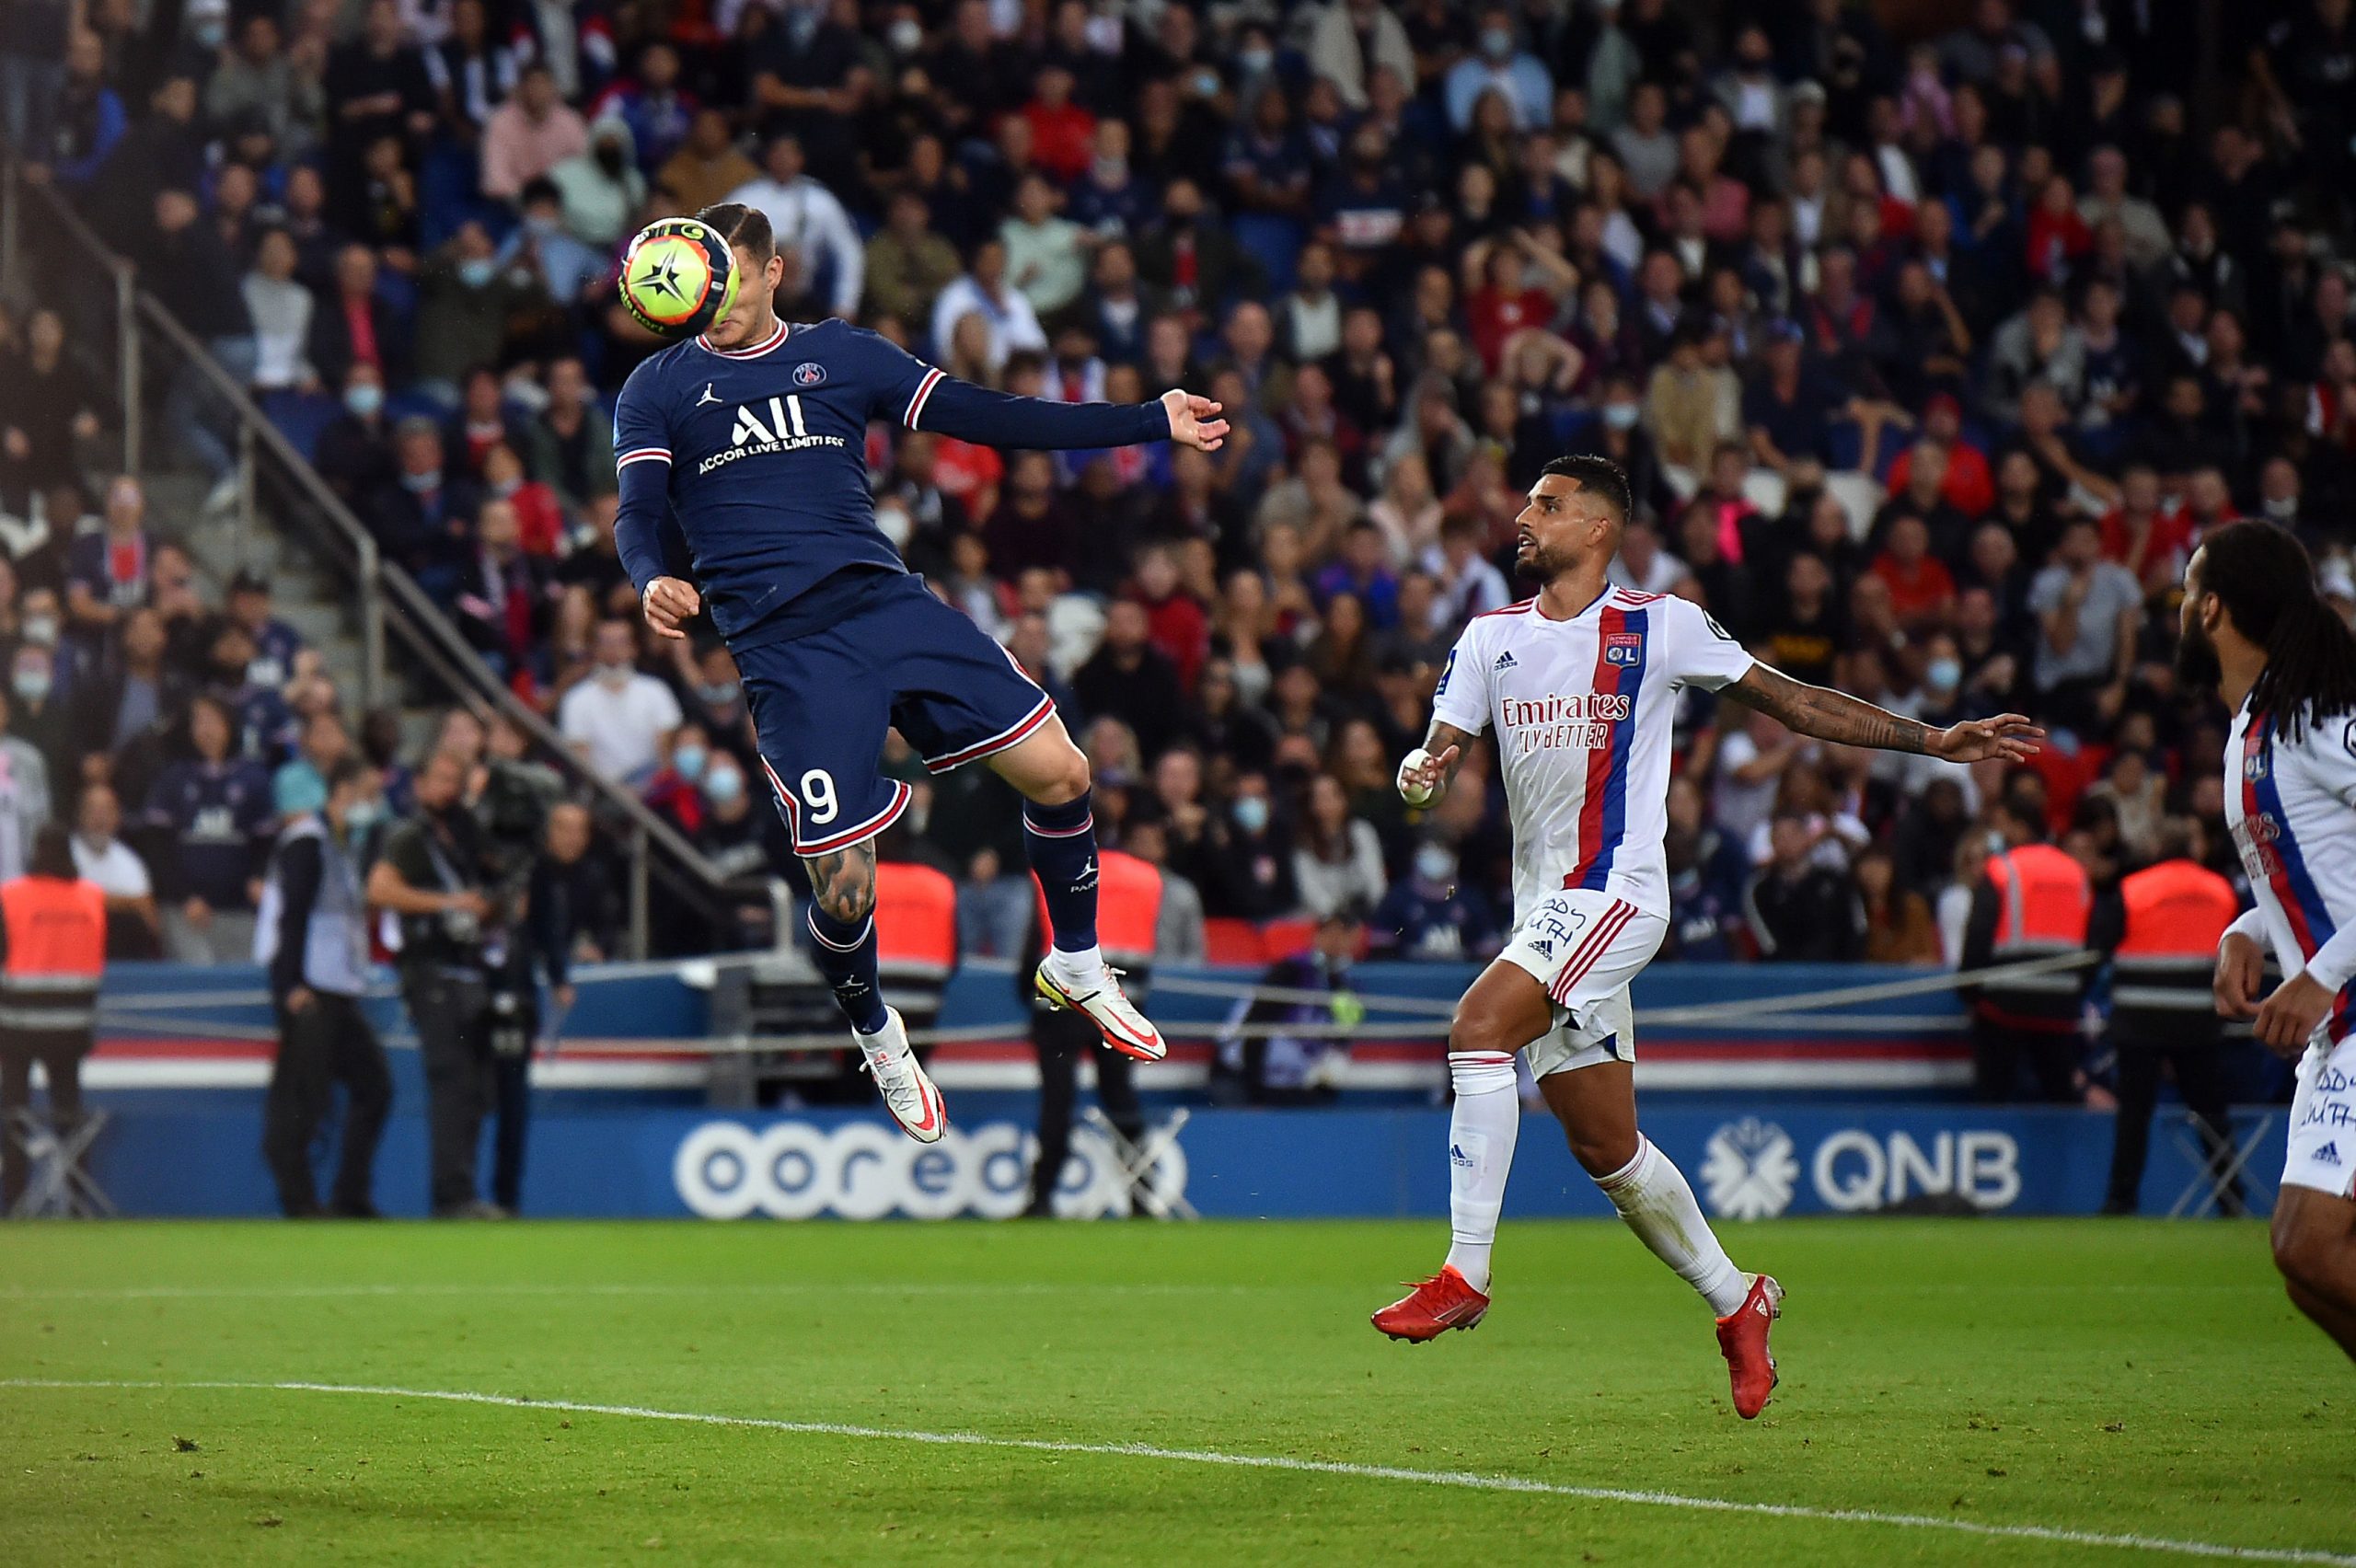 Ligue 1: Mauro Icardi’s last-minute winner salvages 3 points for PSG against Lyon